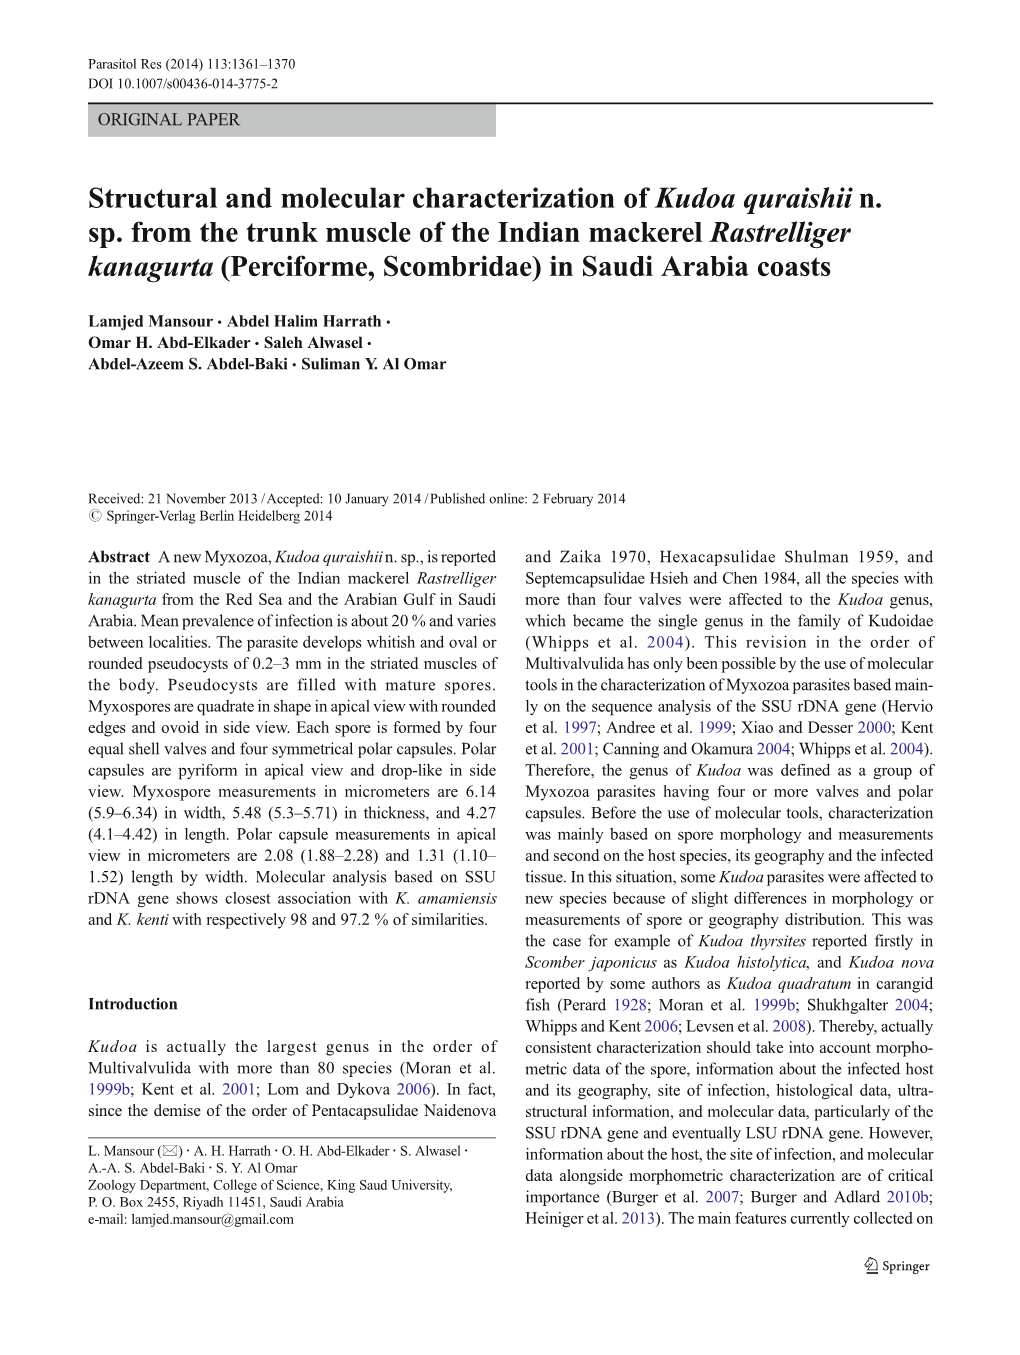 Structural and Molecular Characterization of Kudoa Quraishii N